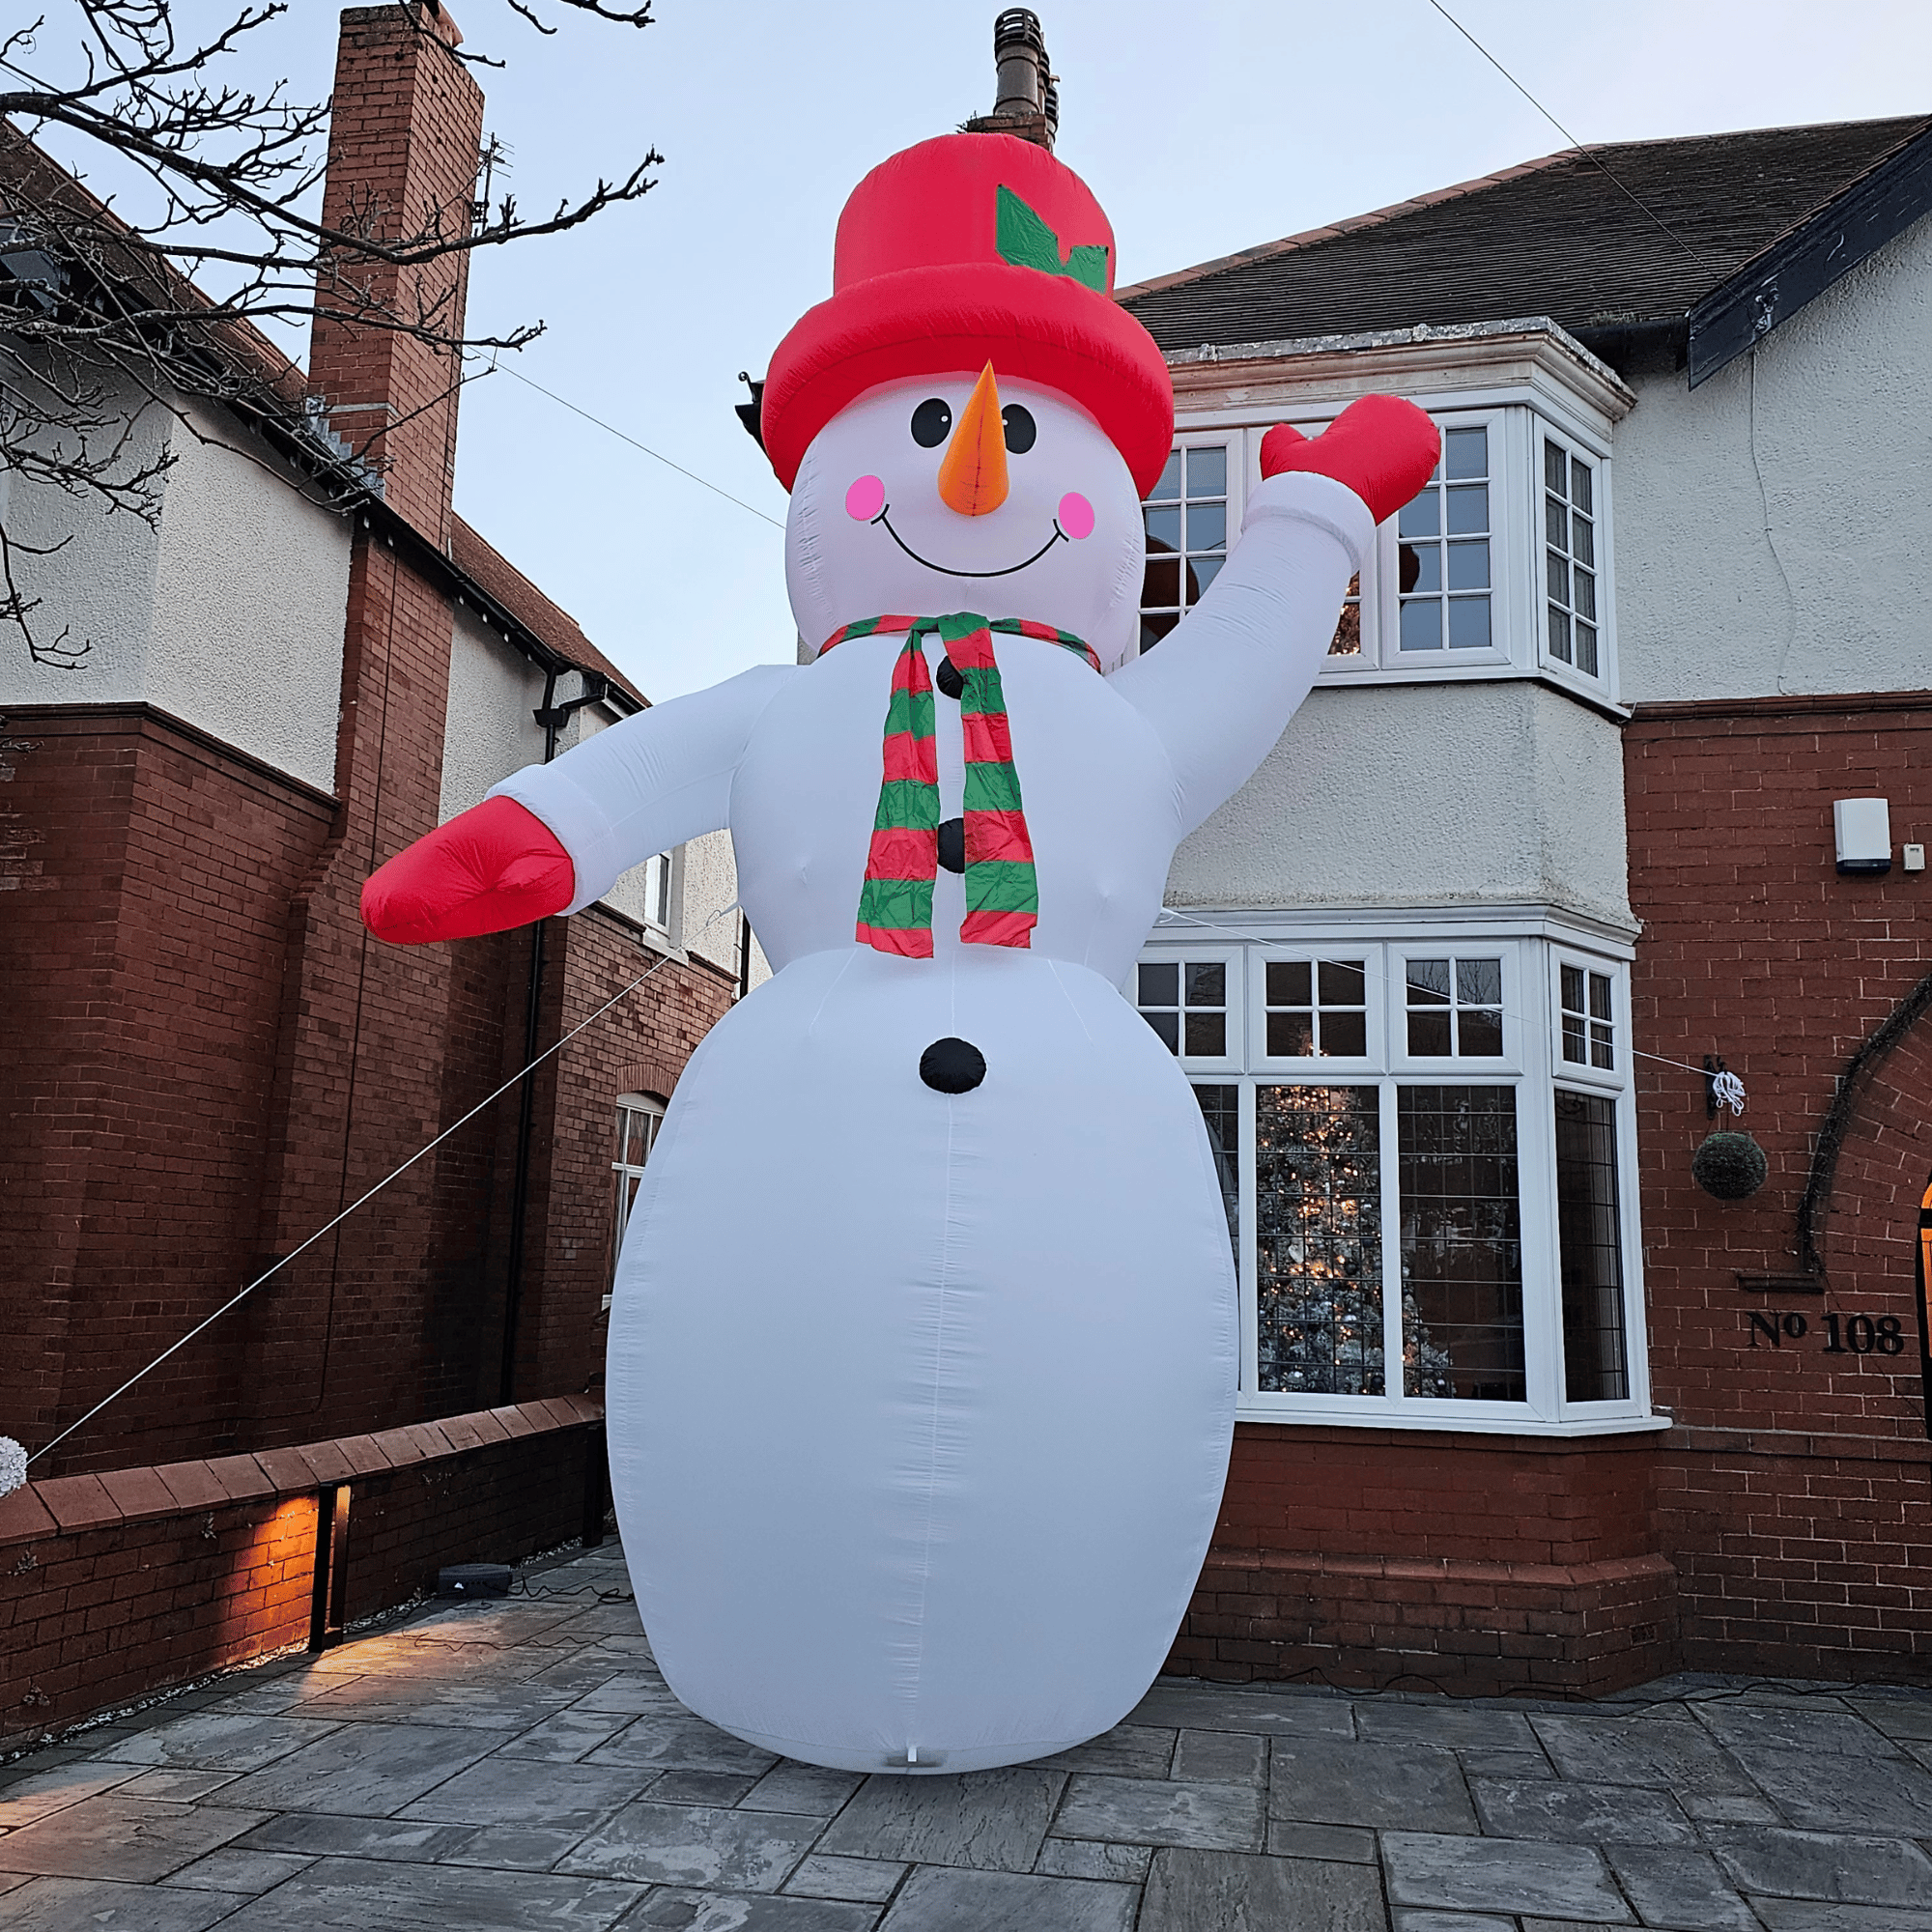 GIANT: 20ft (6m) Outdoor Inflatable Light up Christmas Snowman with Raised Arm with 28 LEDs